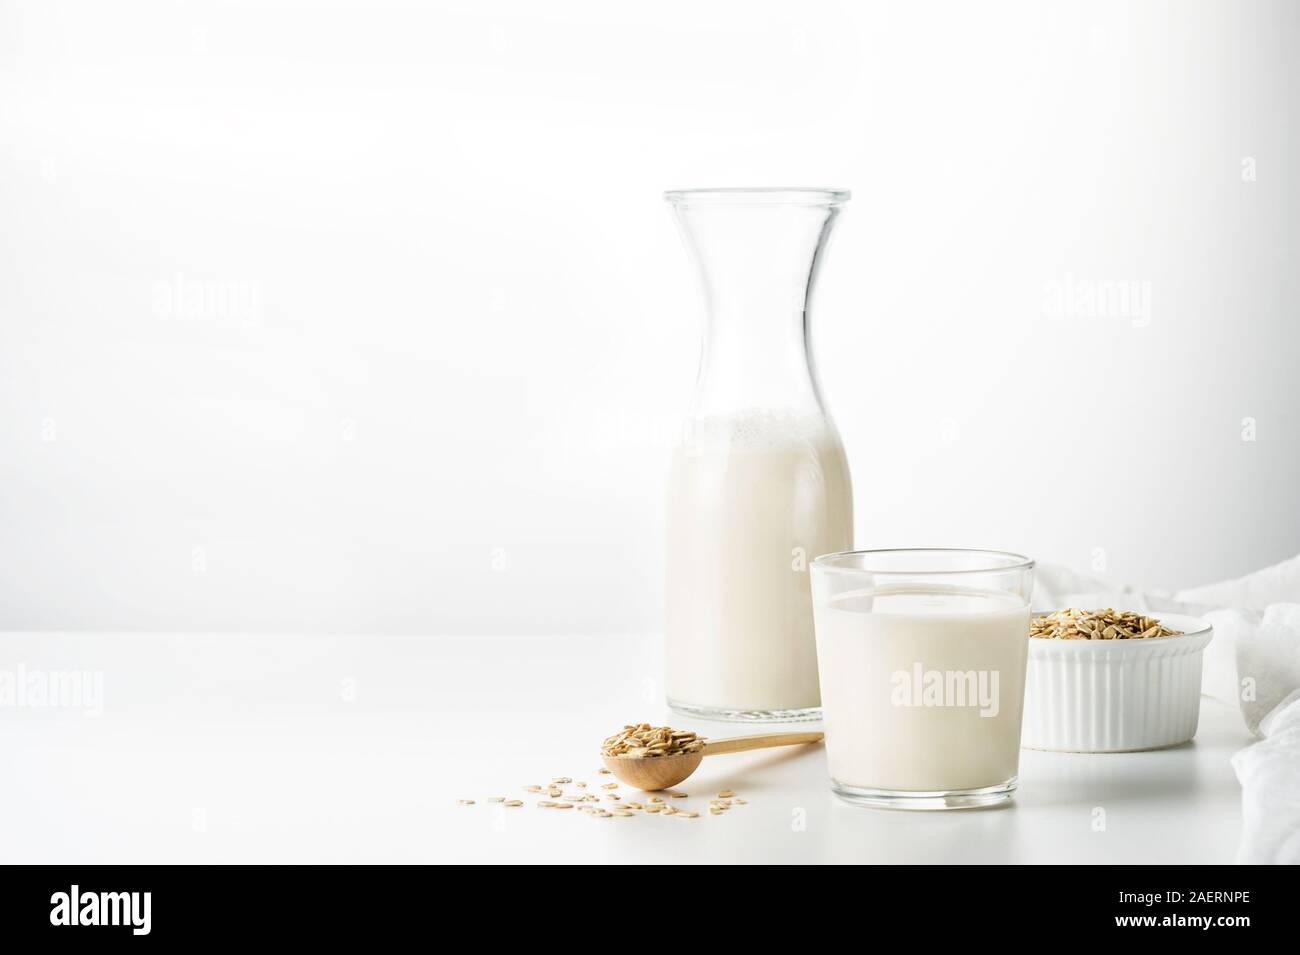 Healthy milk prepared from oats and water blended together, then strained to create a smooth, creamy liquid. Non diary. Vegetarian diet concept. Stock Photo